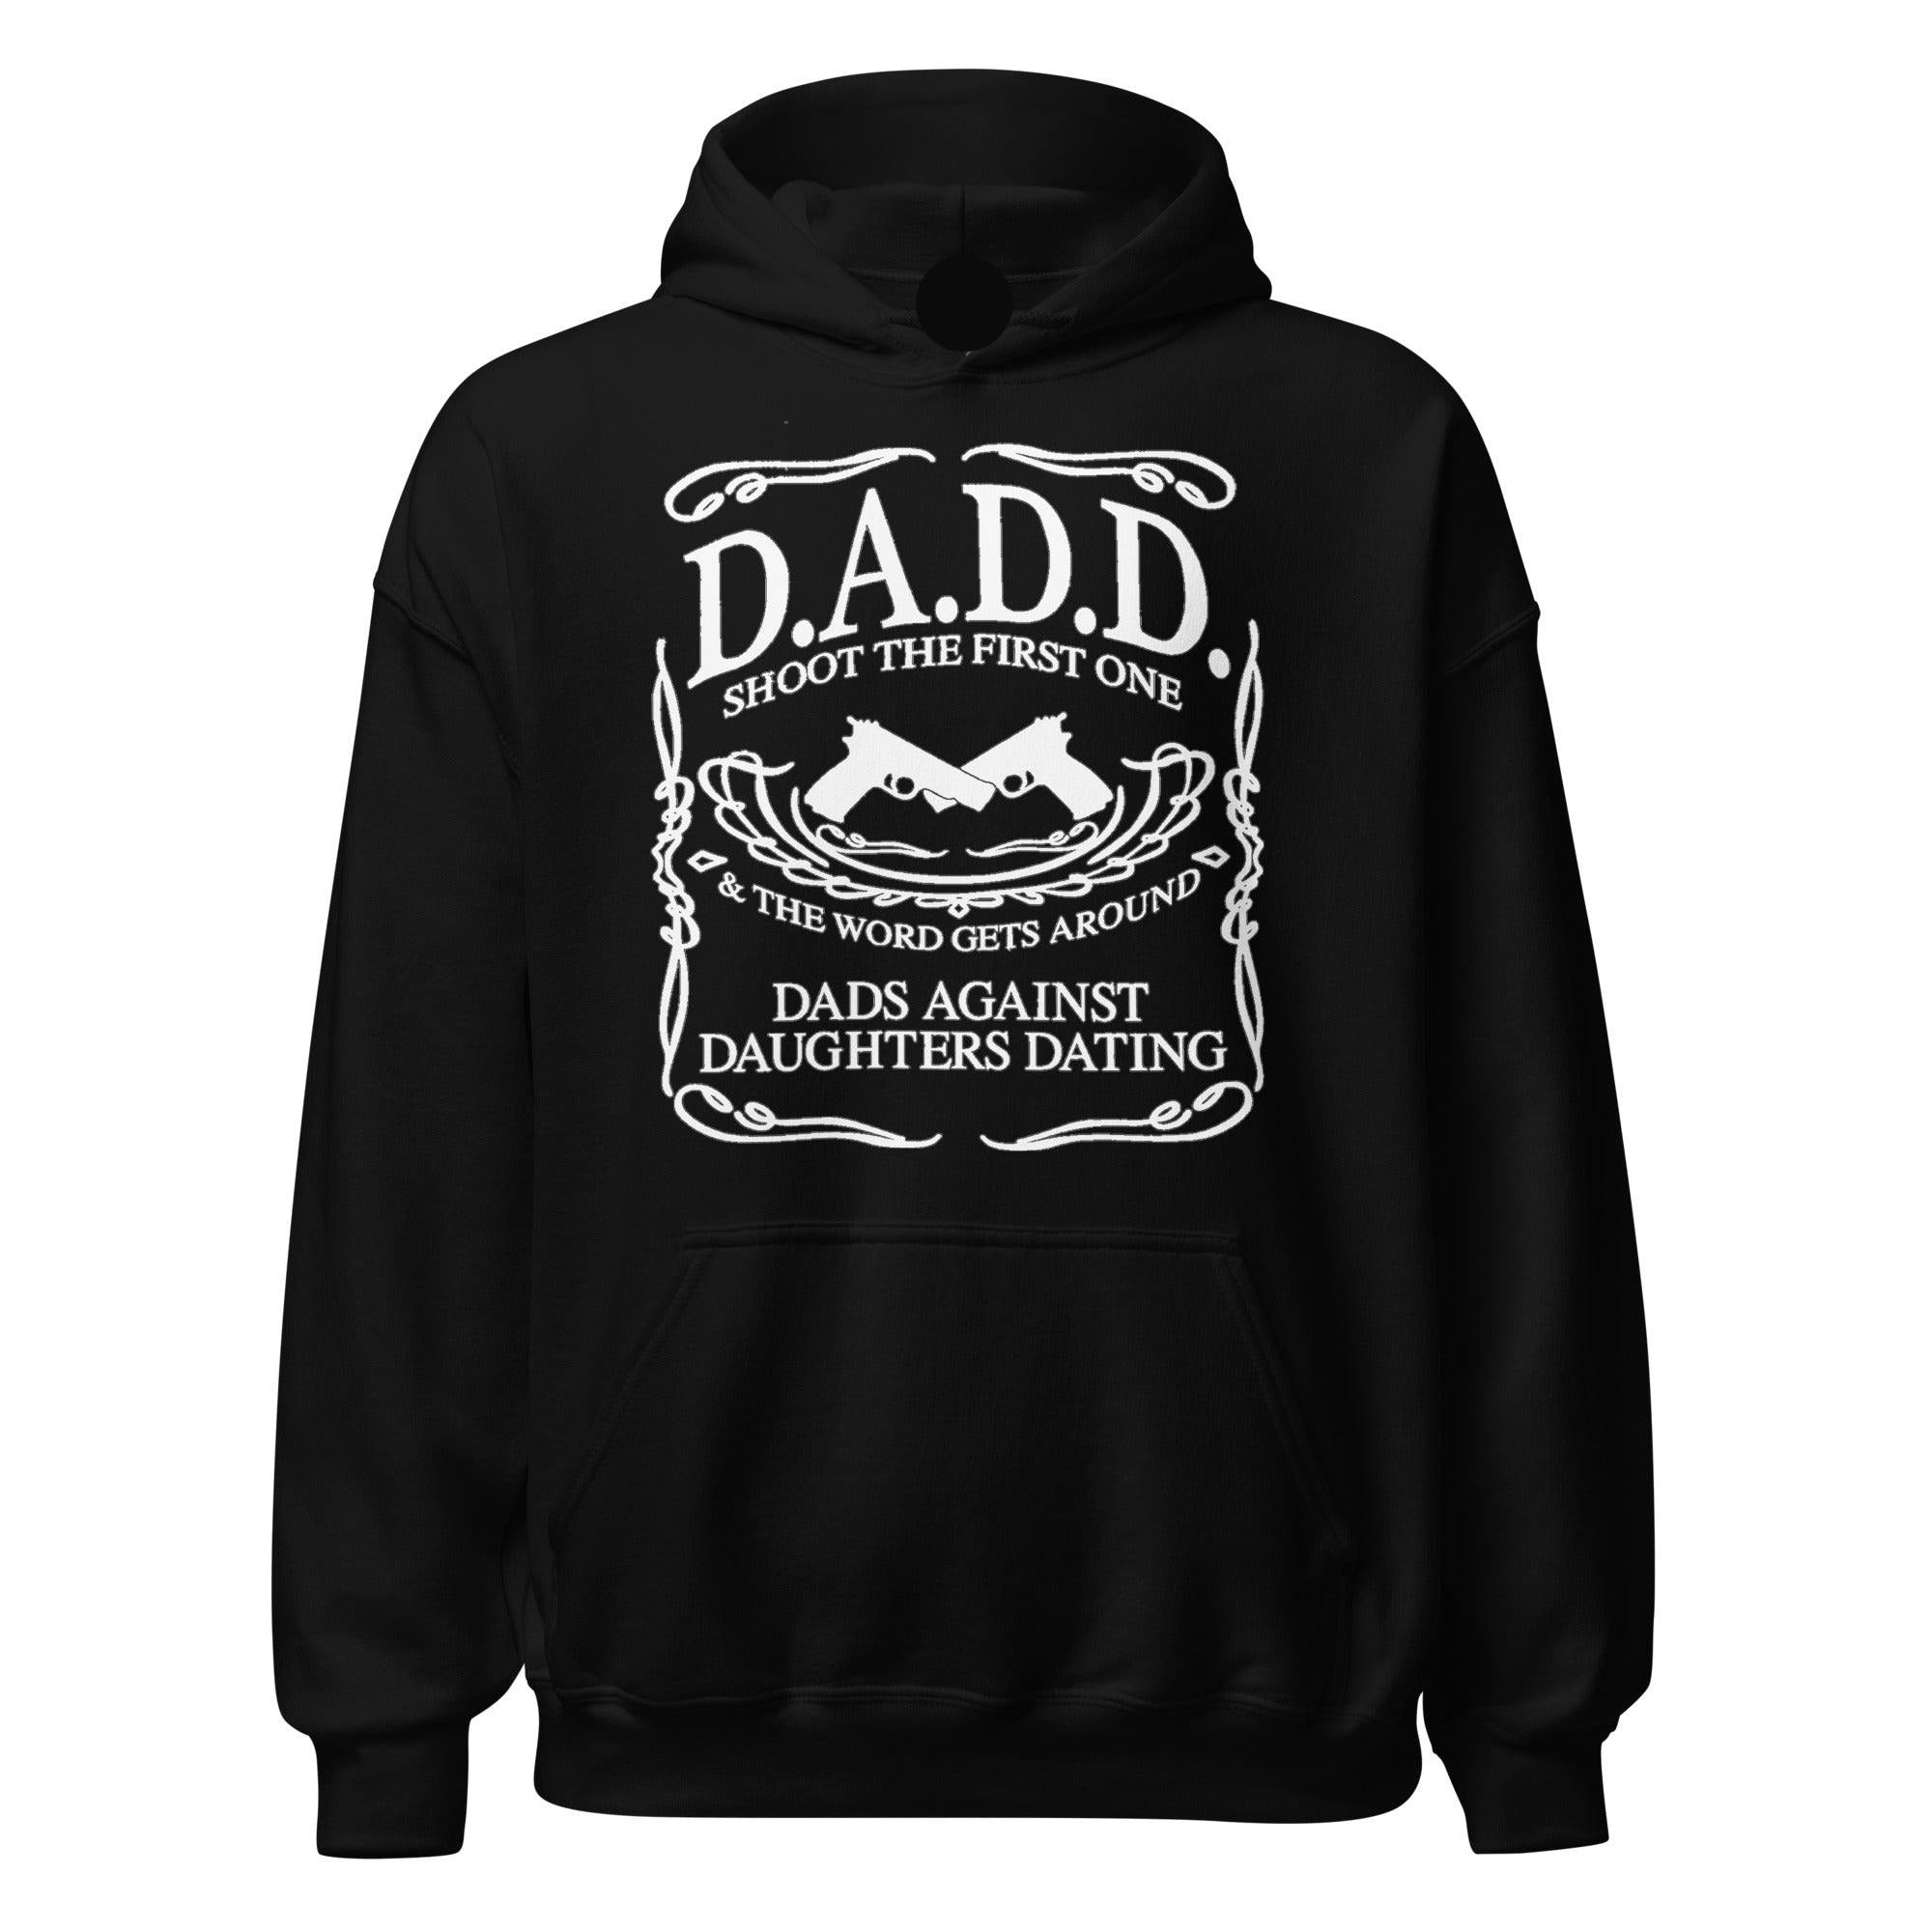 Cotton Softstyle Hoodie Dads Against Daughter Dating Top Koala Pullover - TopKoalaTee